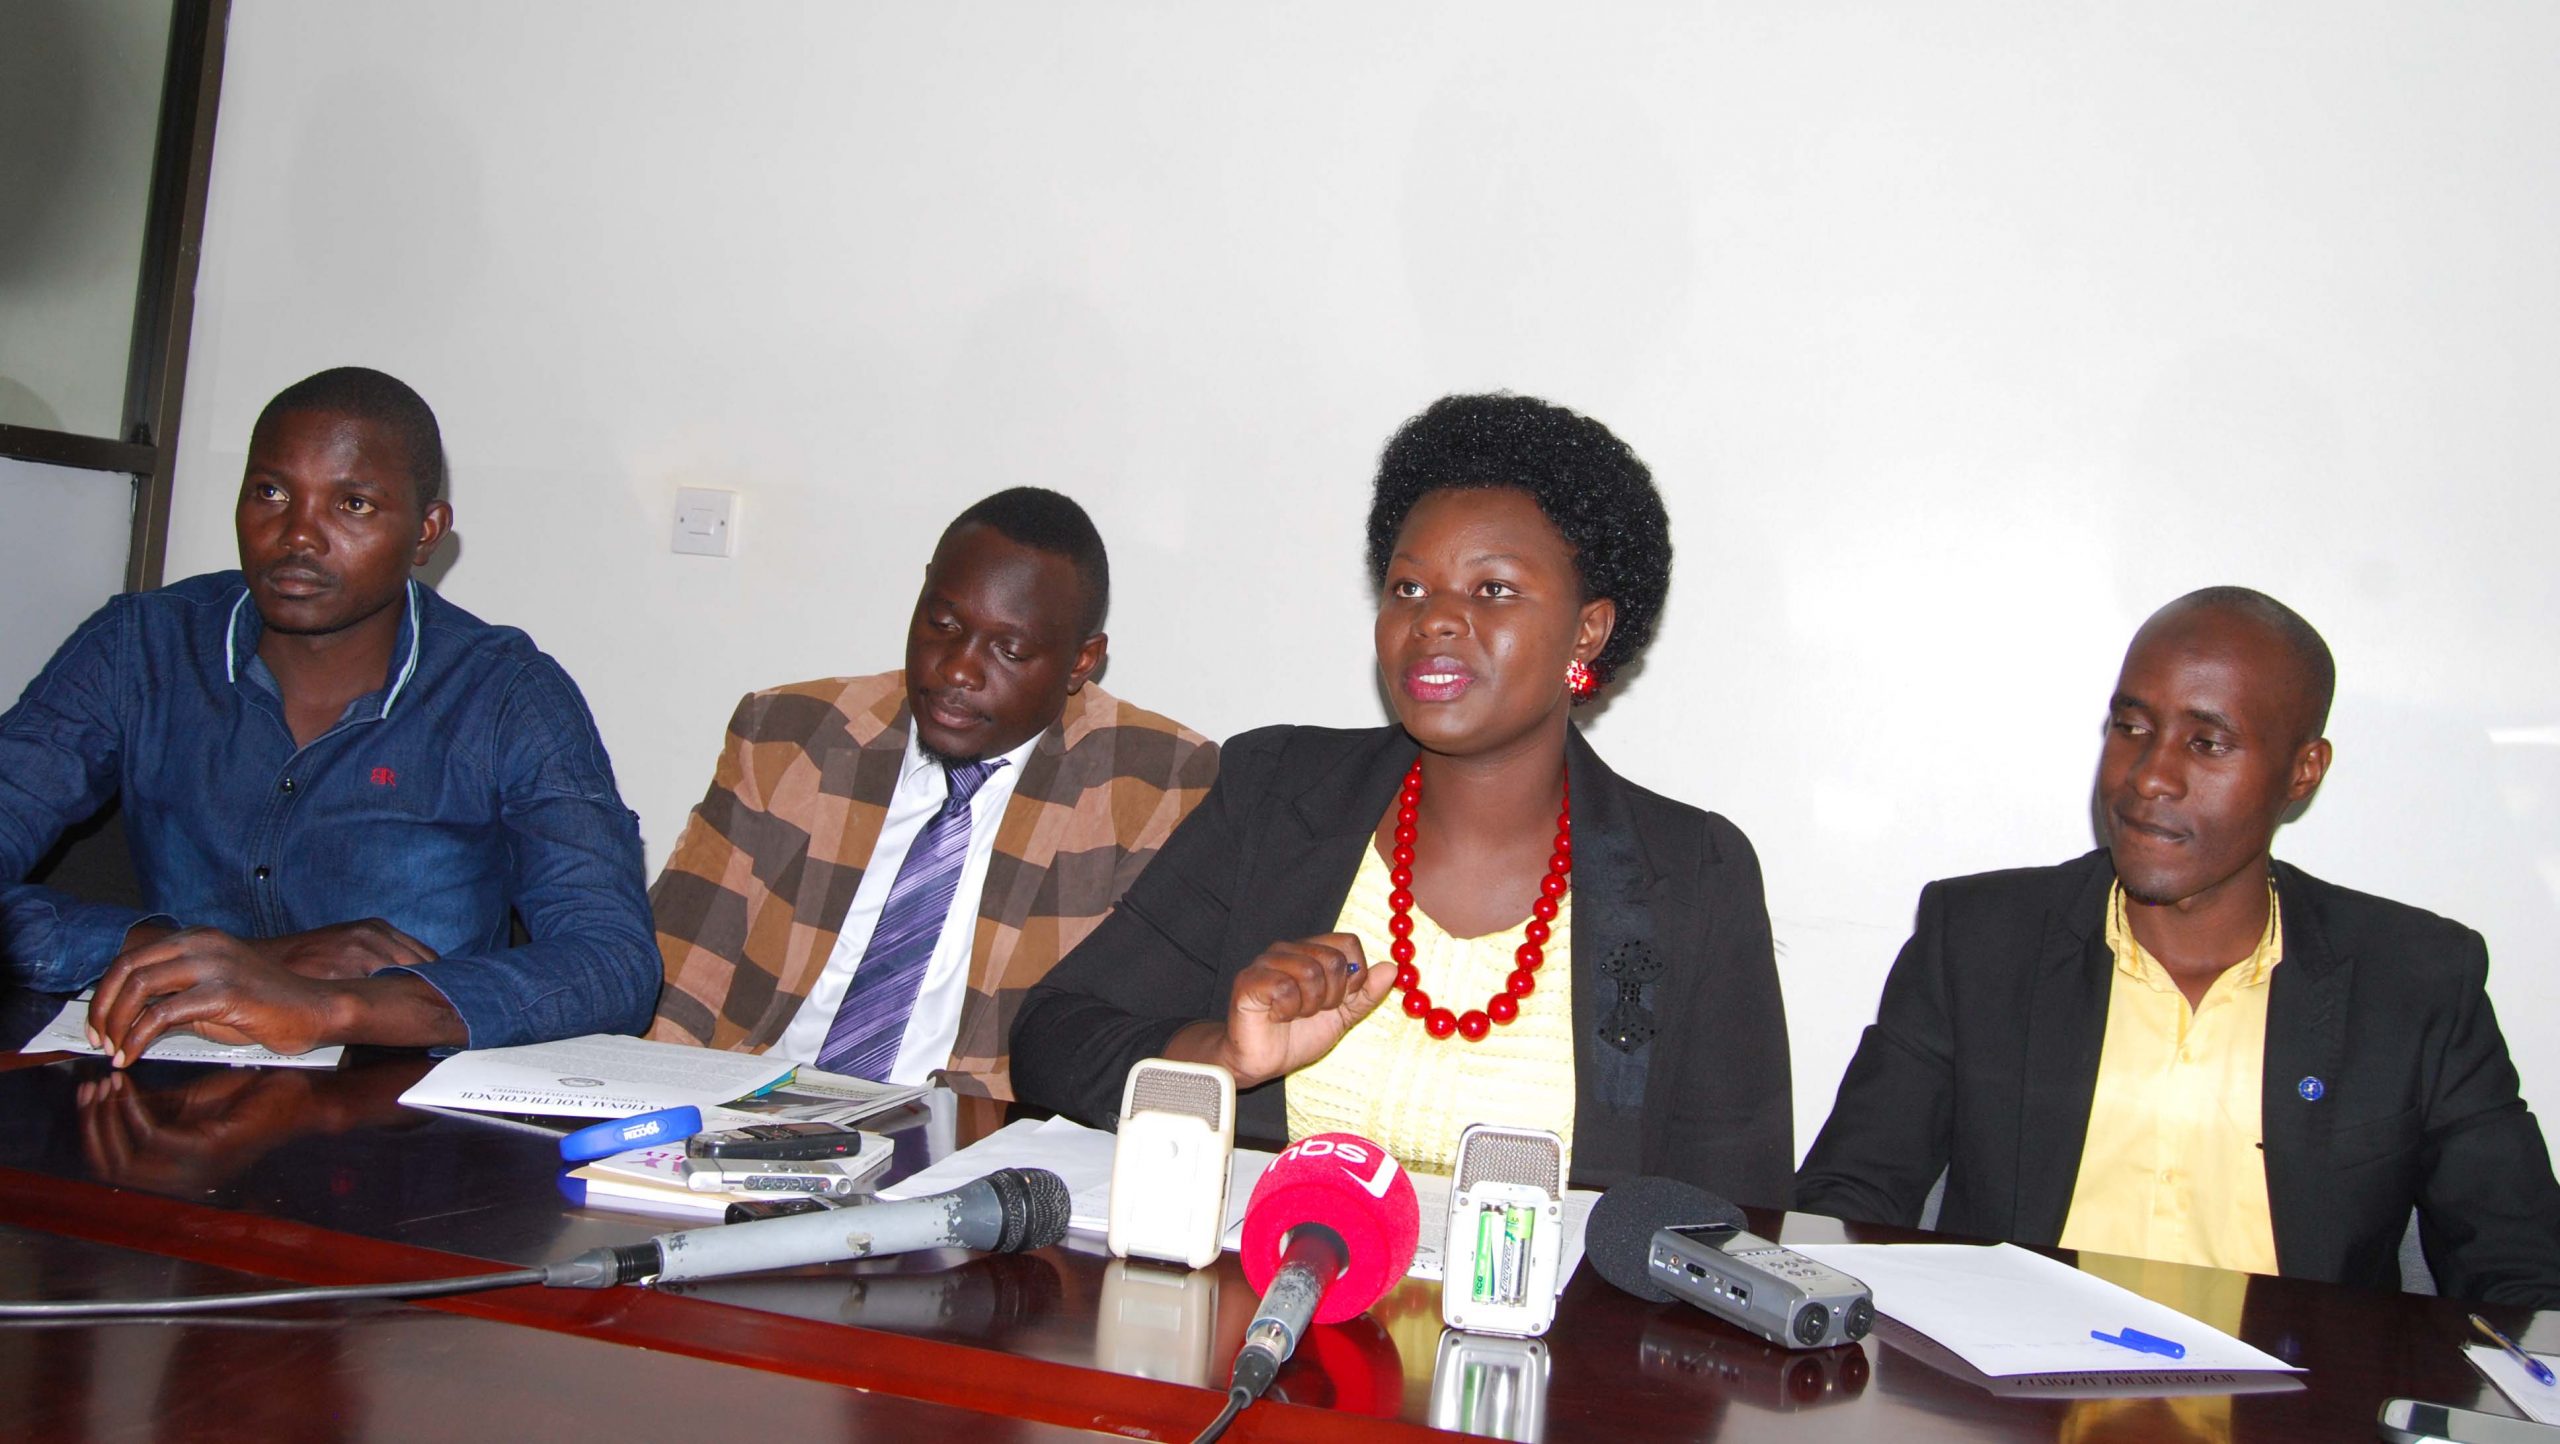 Lillian Aber during the Press Conference at the headquarters in Ntinda